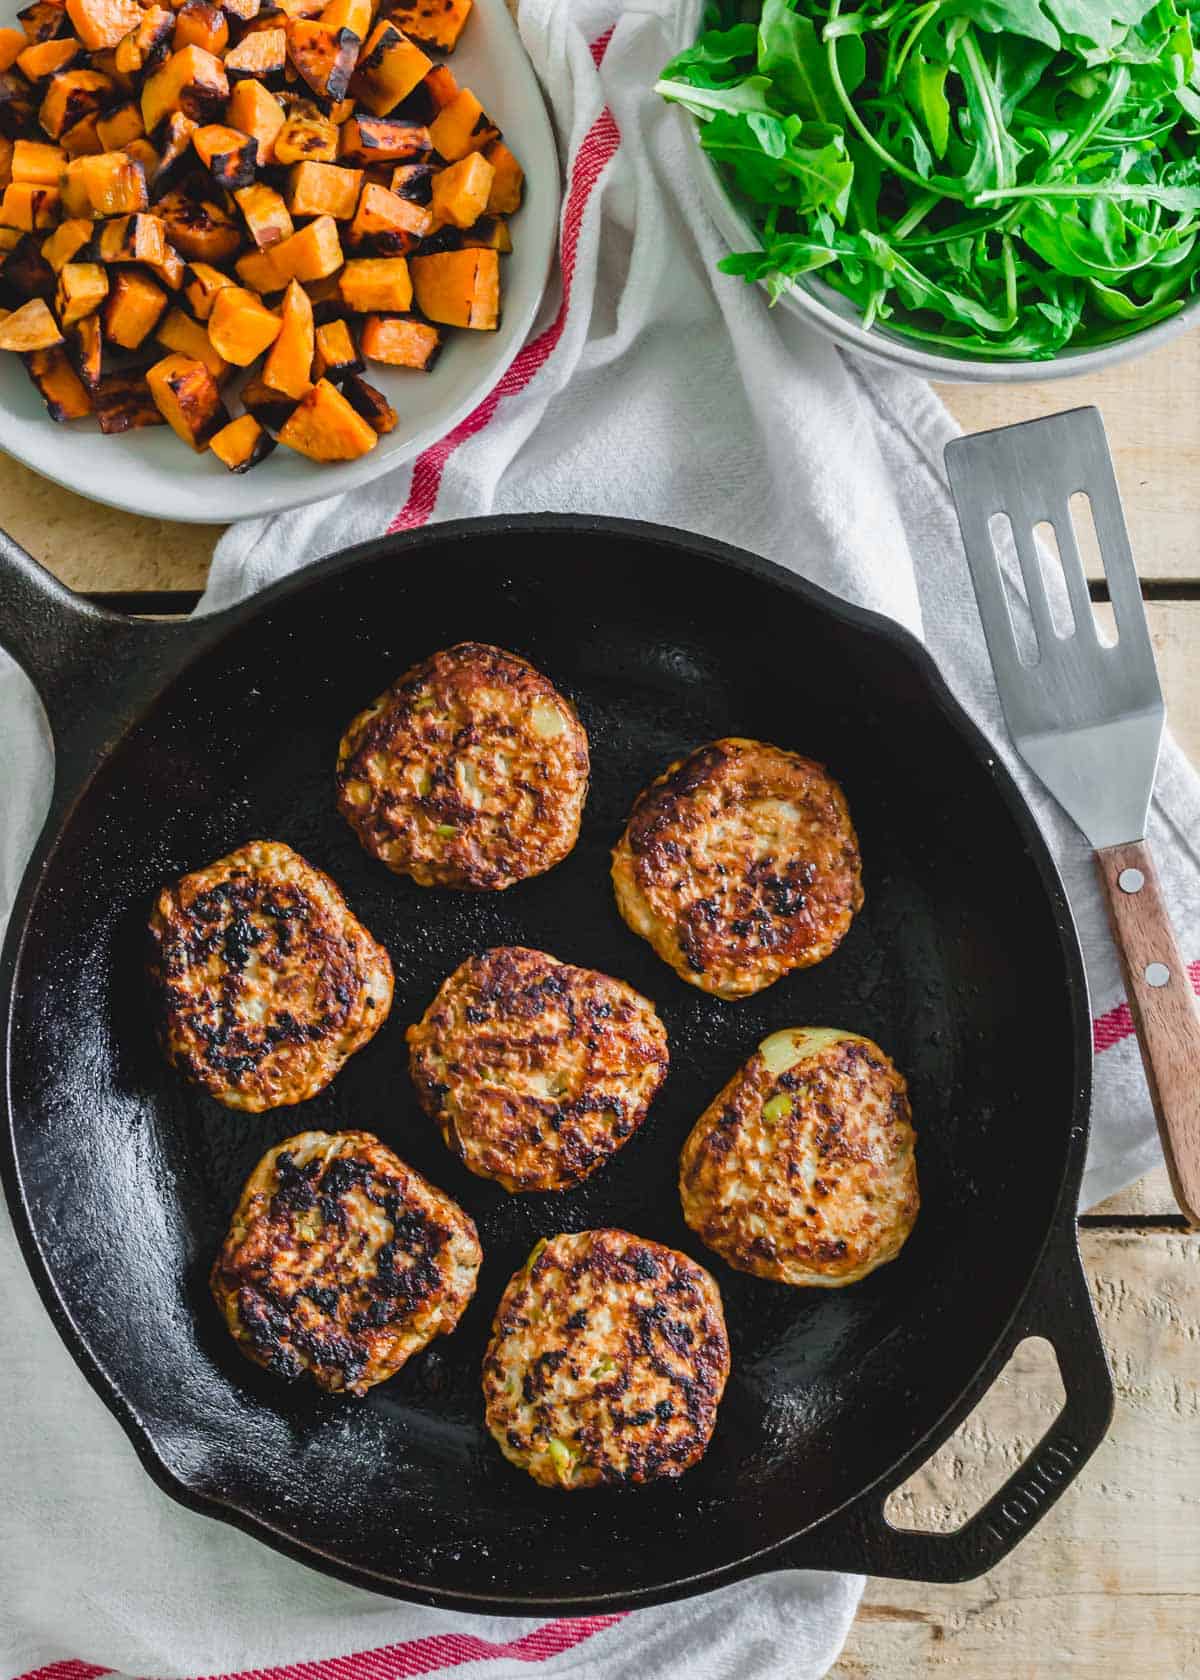 Cooked breakfast chicken sausage patties in a cast iron skillet.